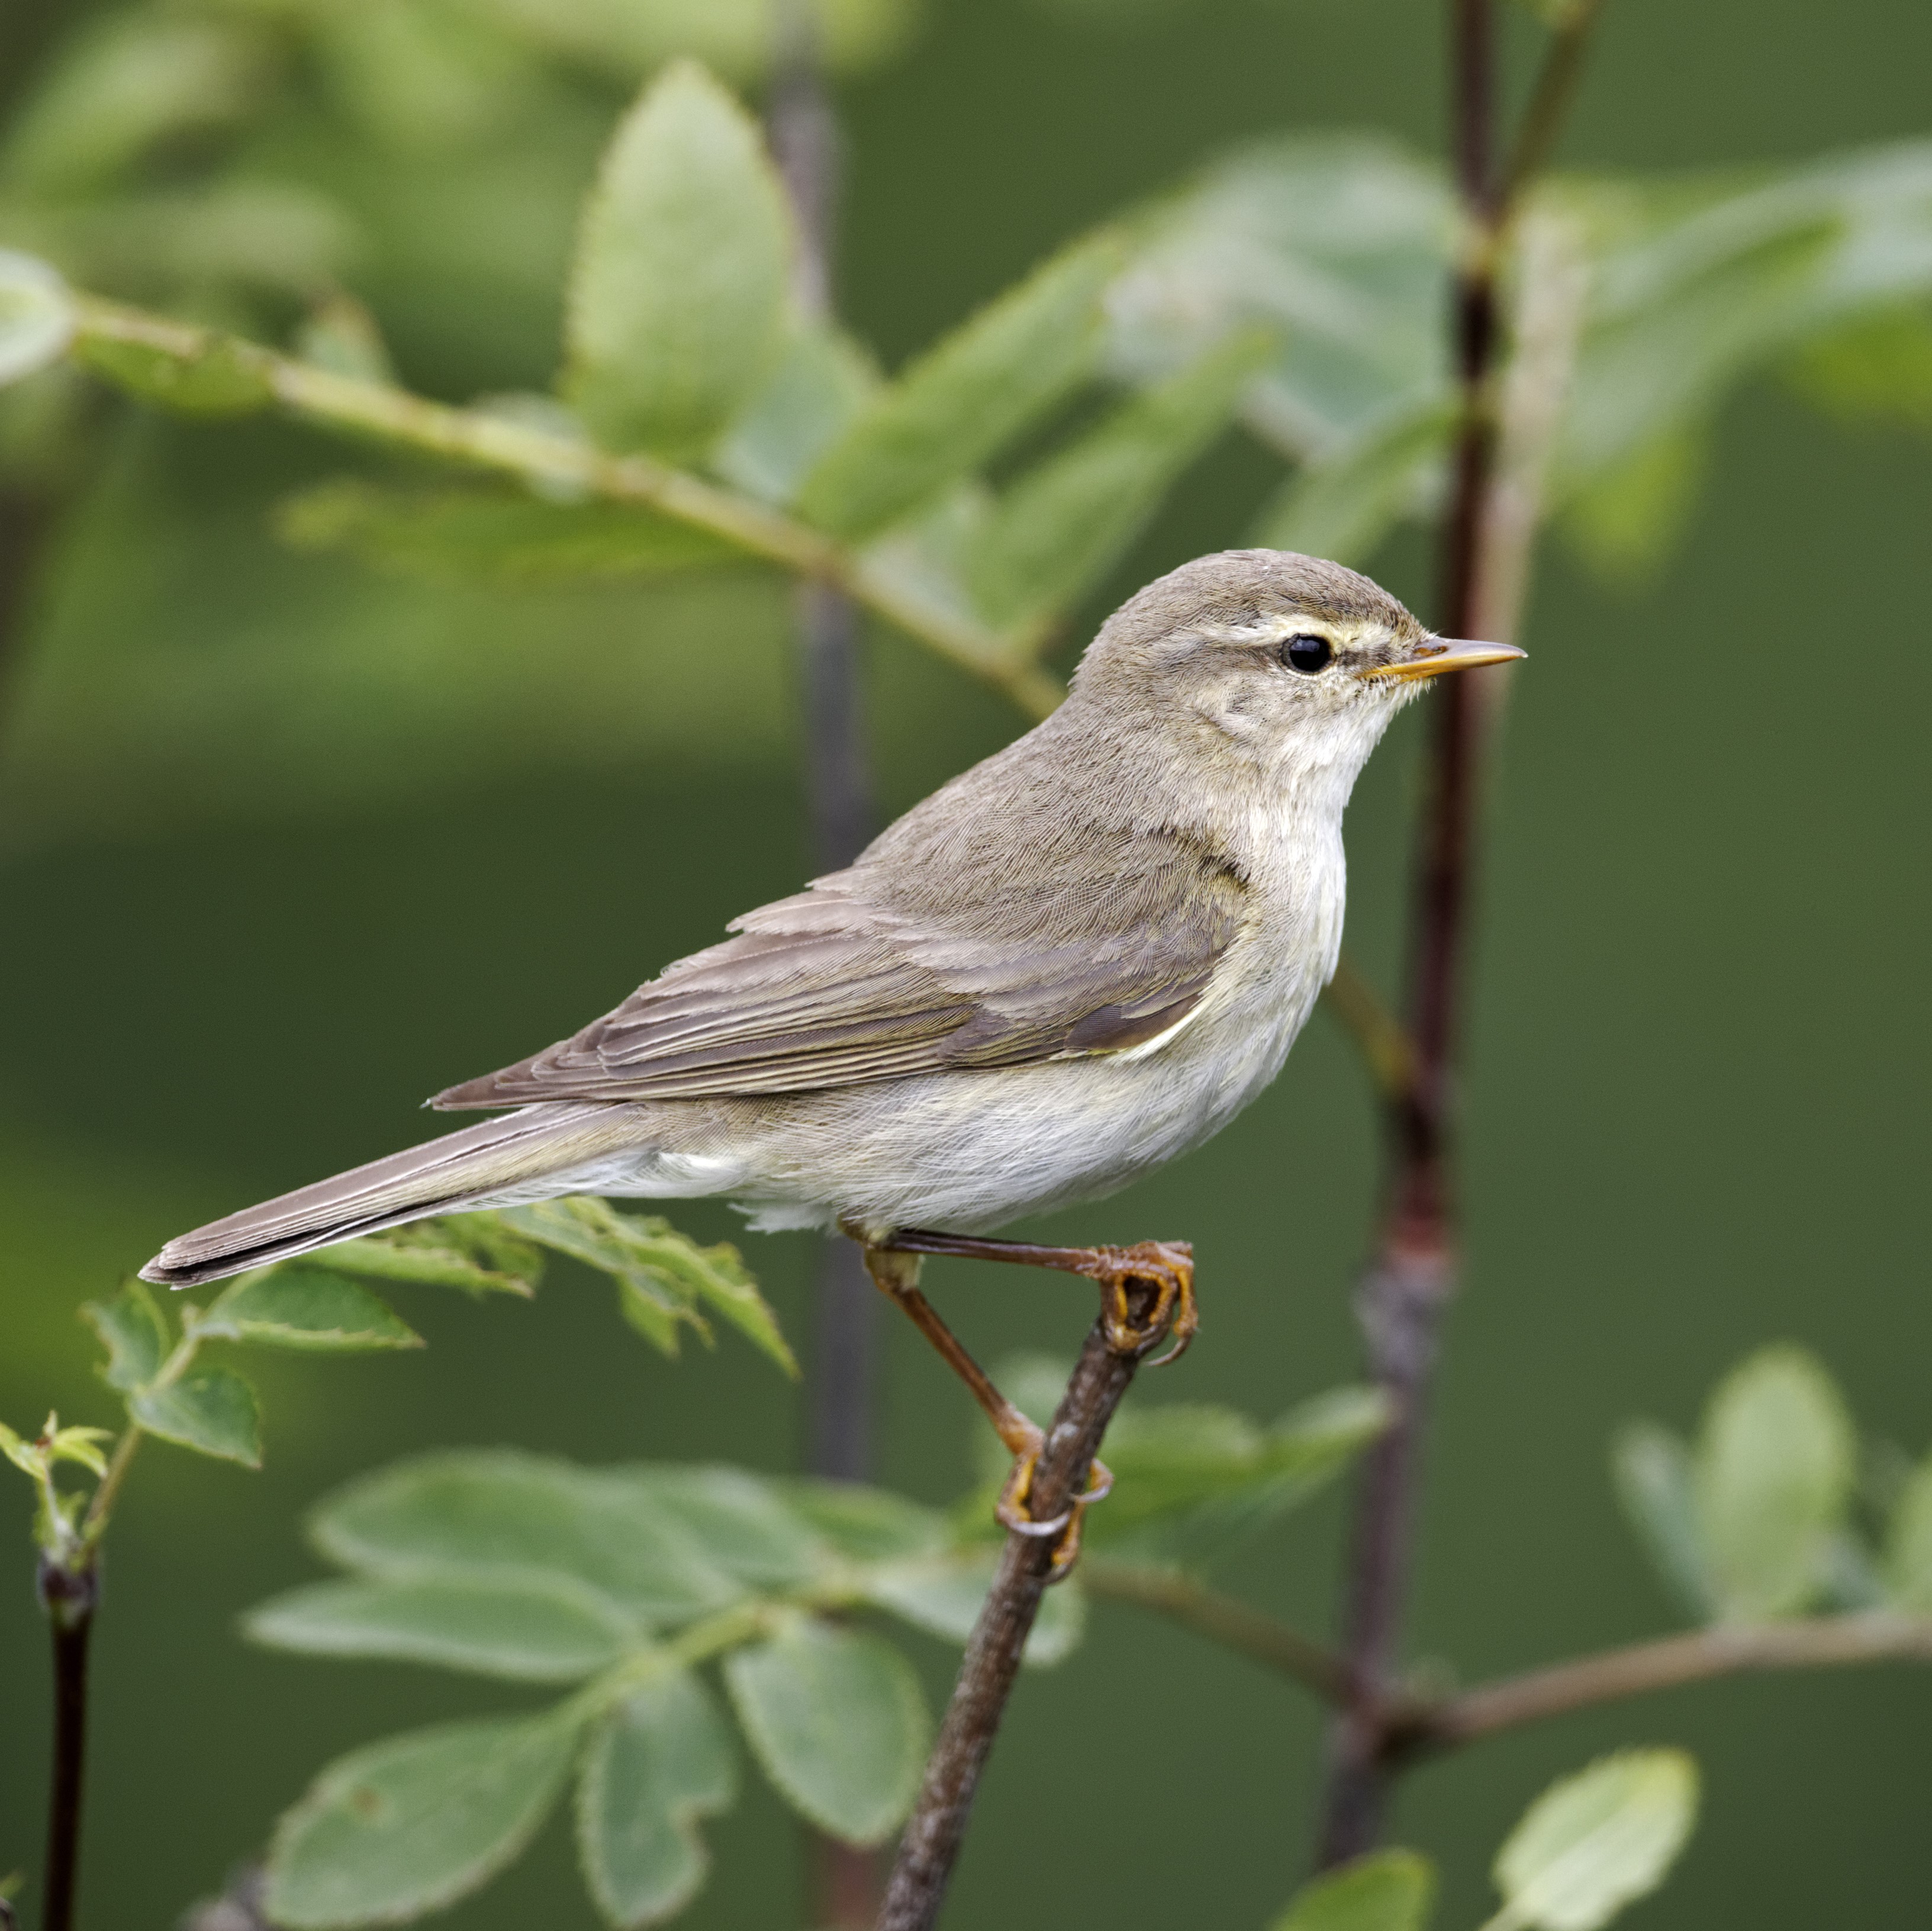 Close up of a Willow Warbler perched on a tree branch